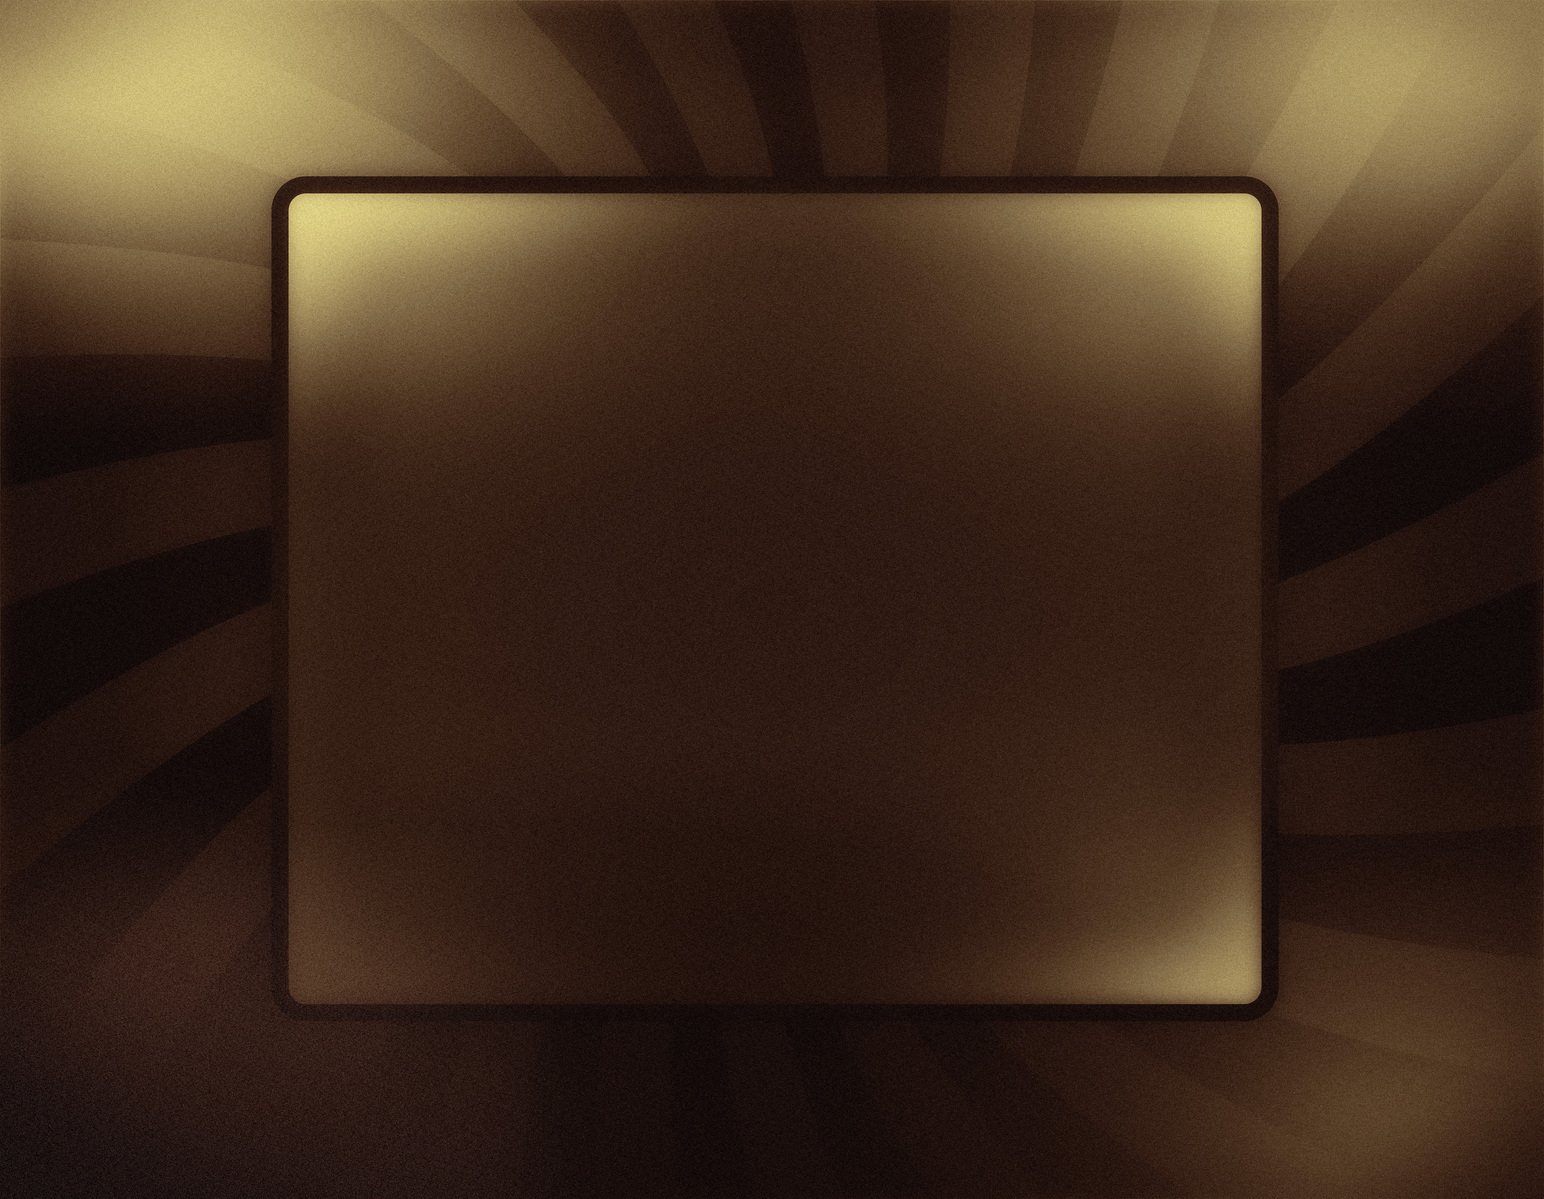 the background of a brown square in motion with a dim light